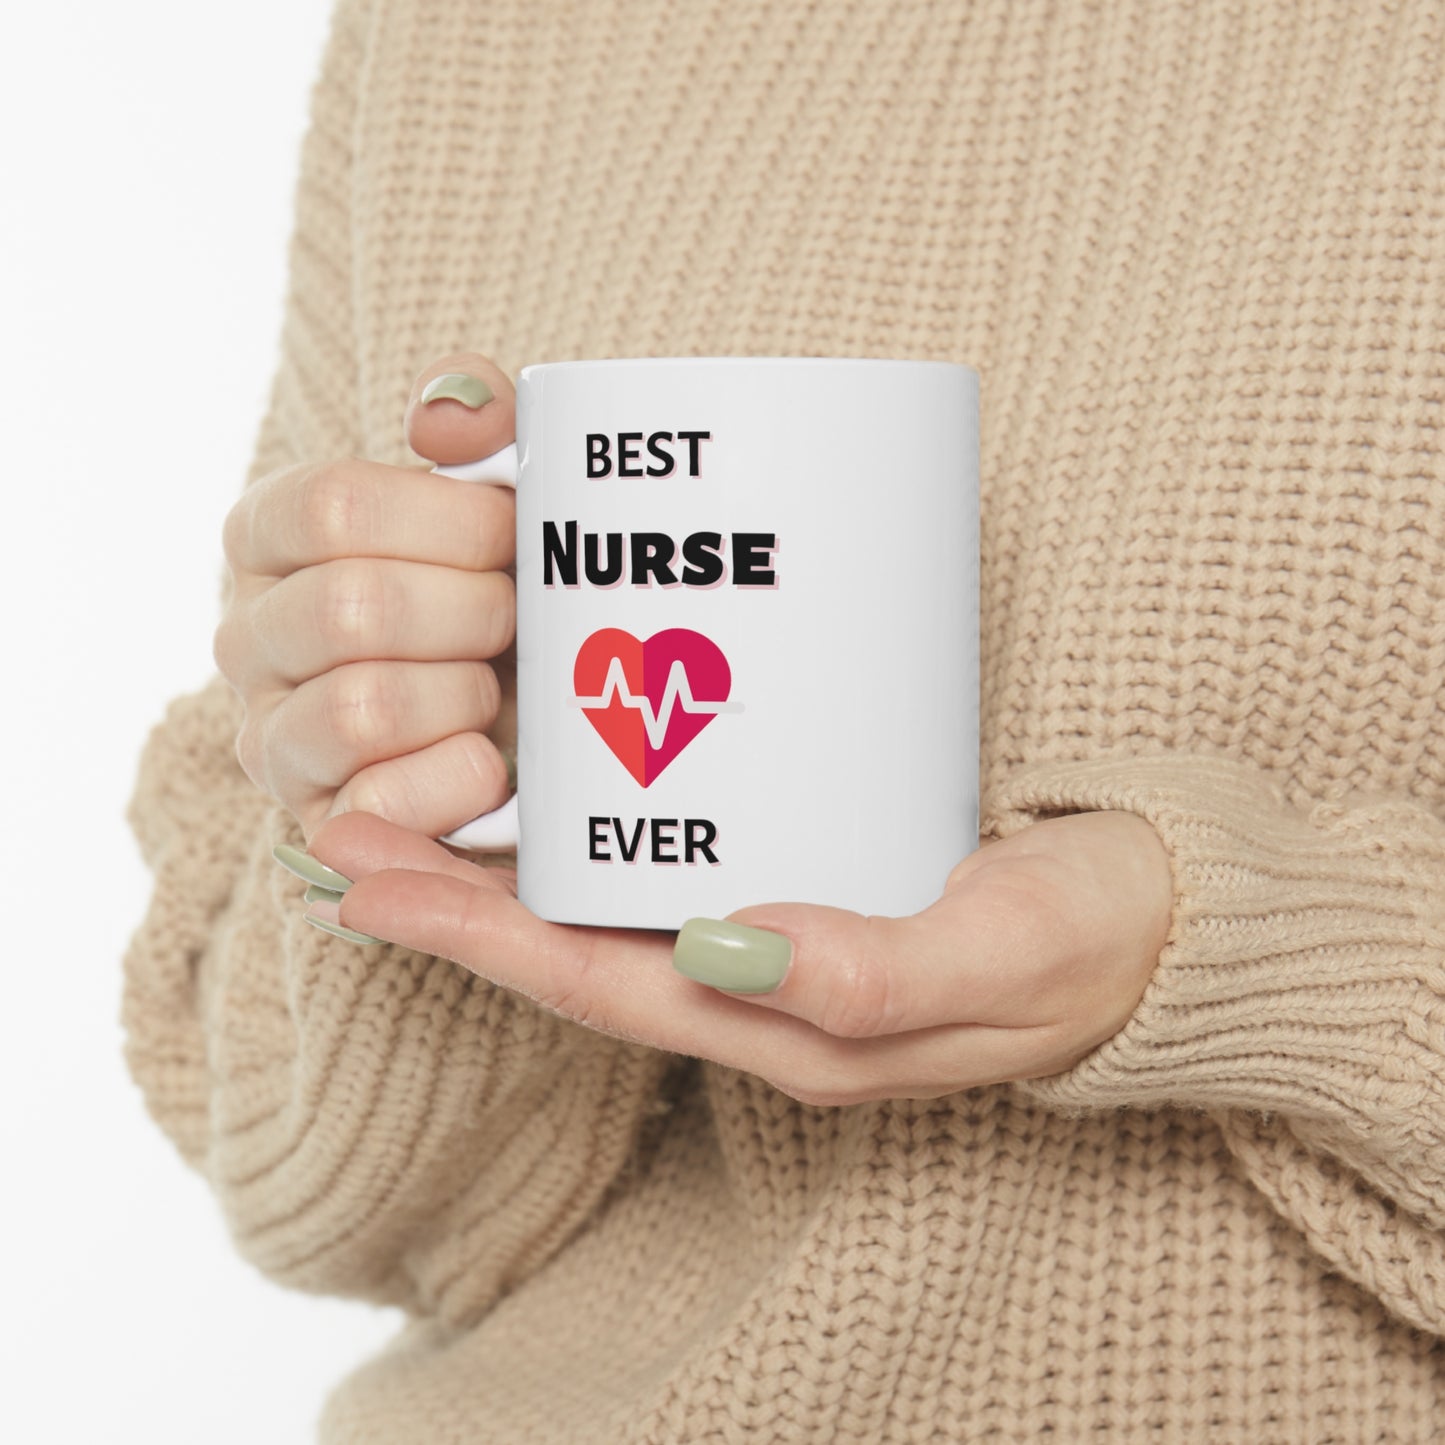 "Best Nurse Ever" Coffee Mug - Weave Got Gifts - Unique Gifts You Won’t Find Anywhere Else!